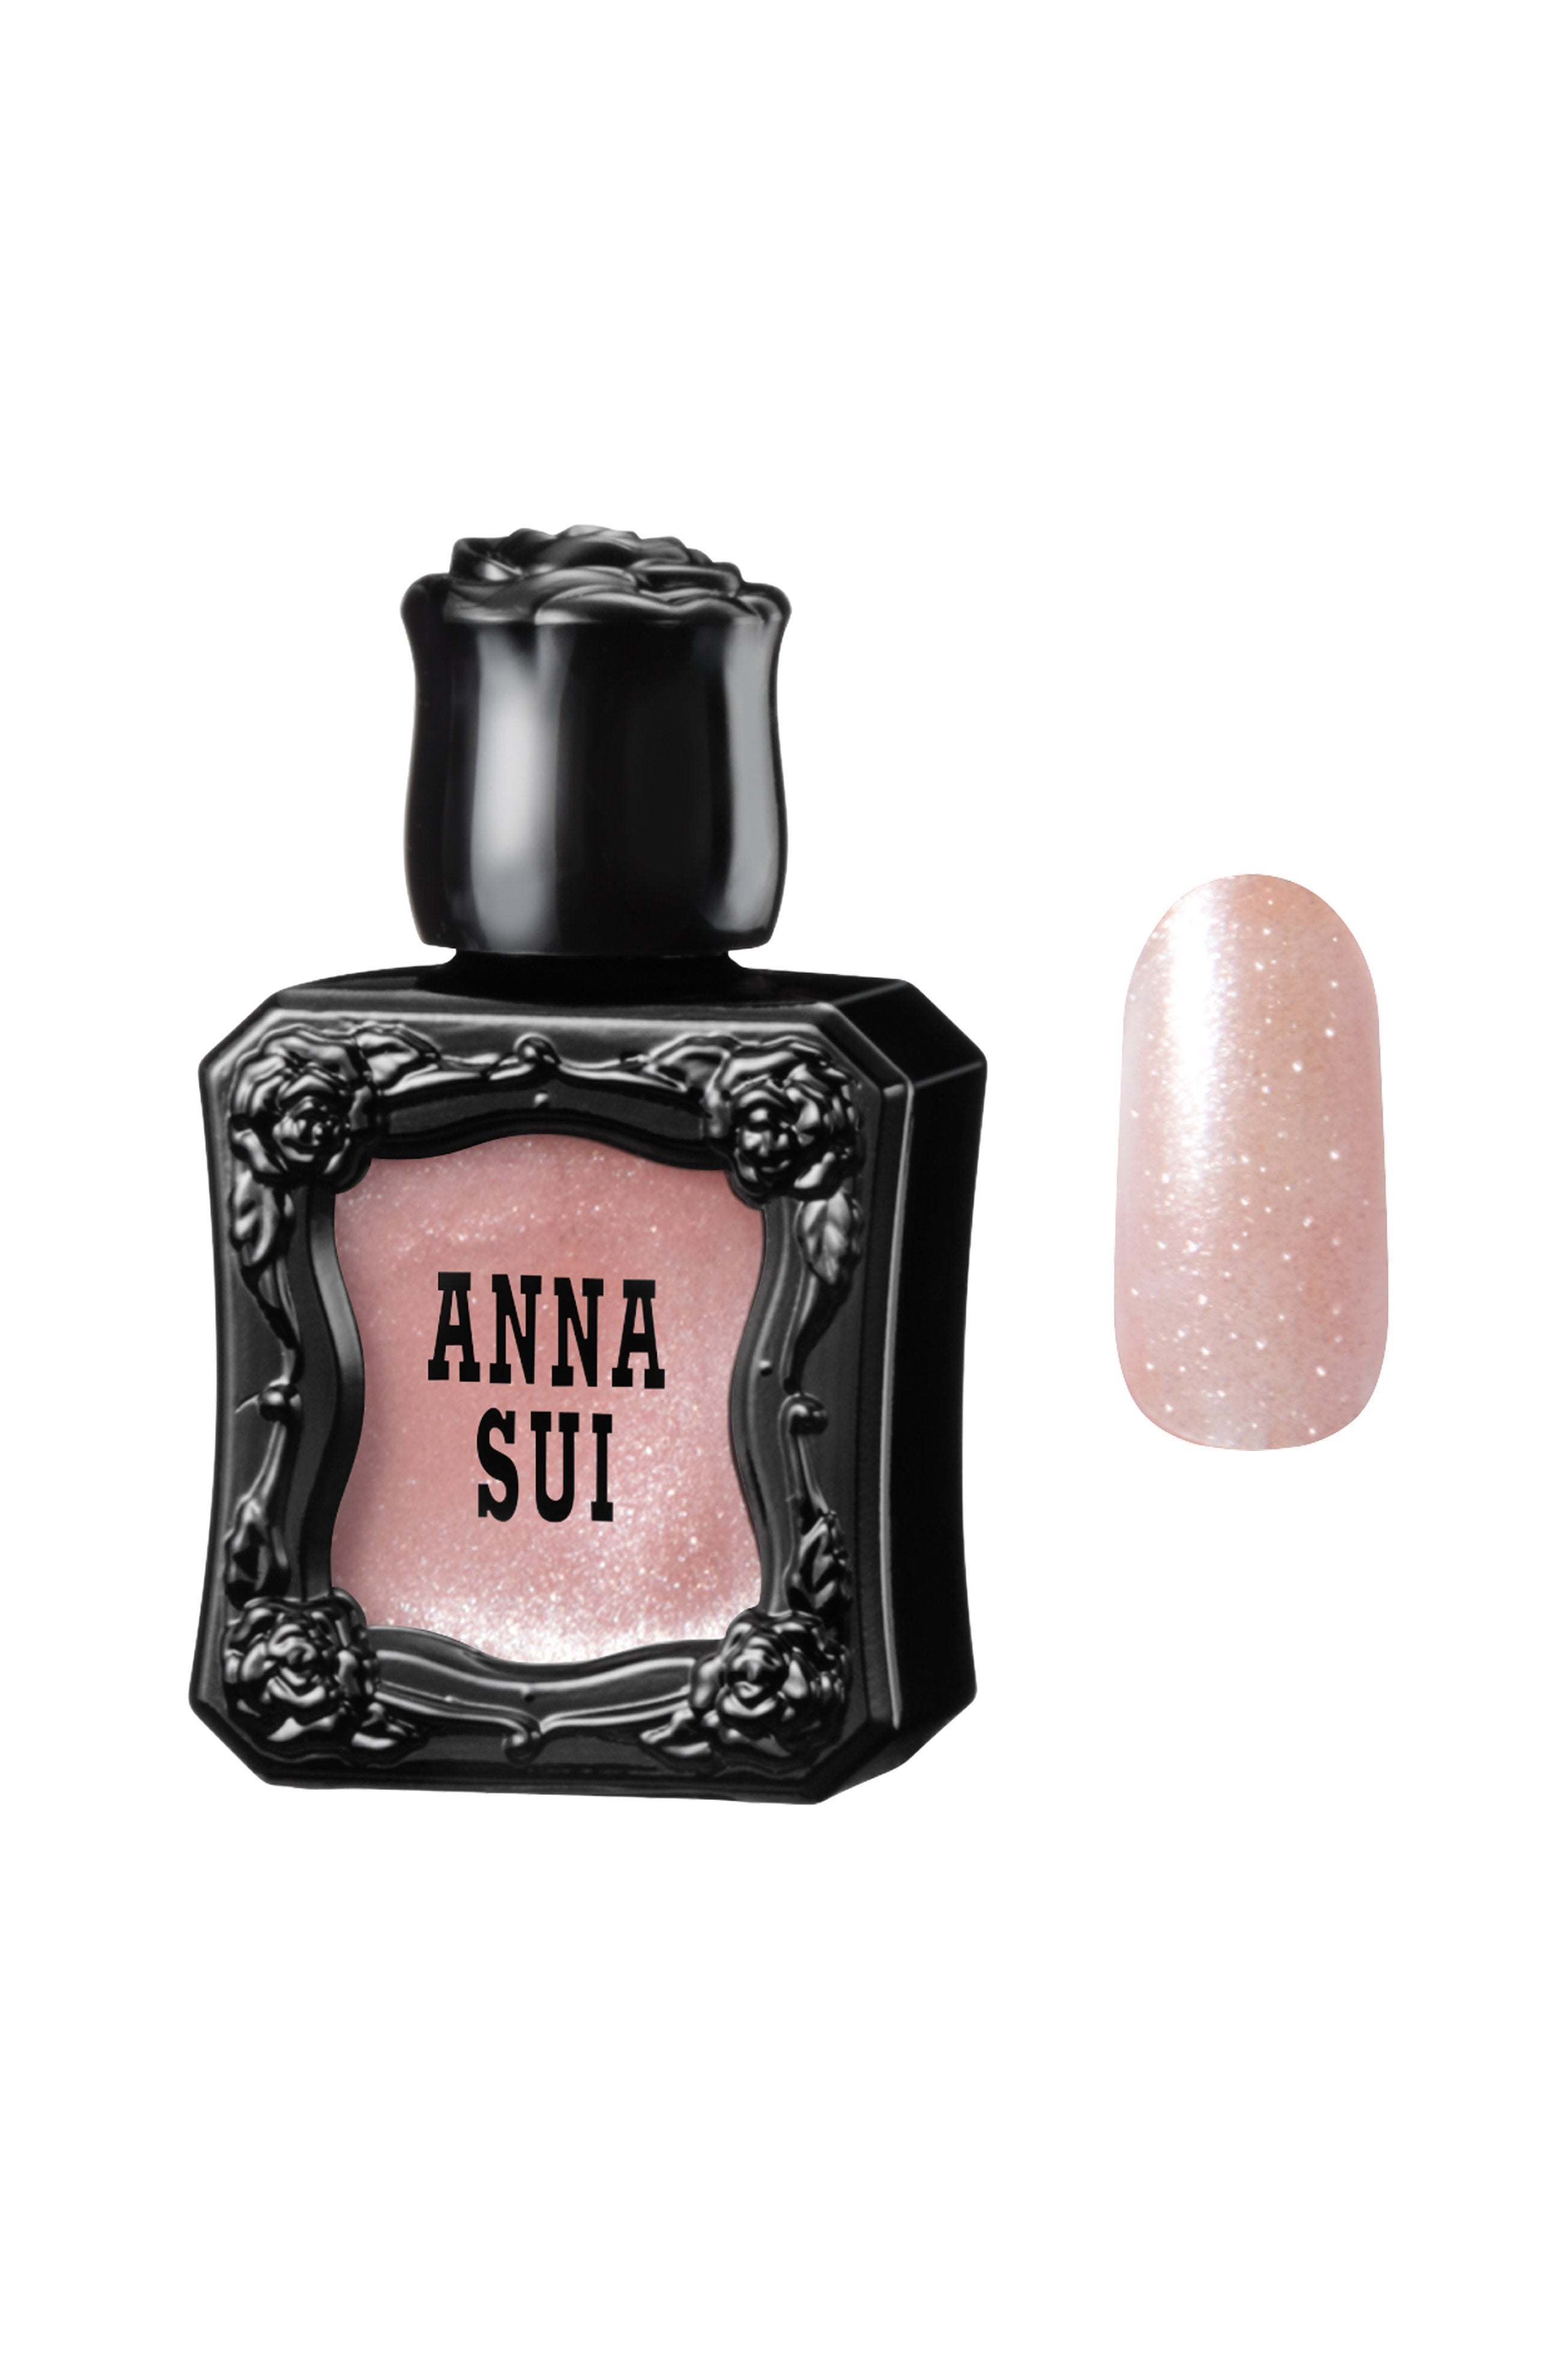 ANNA SUI NAIL COLOR 2015 SWATCHES & REVIEW - Beautygeeks